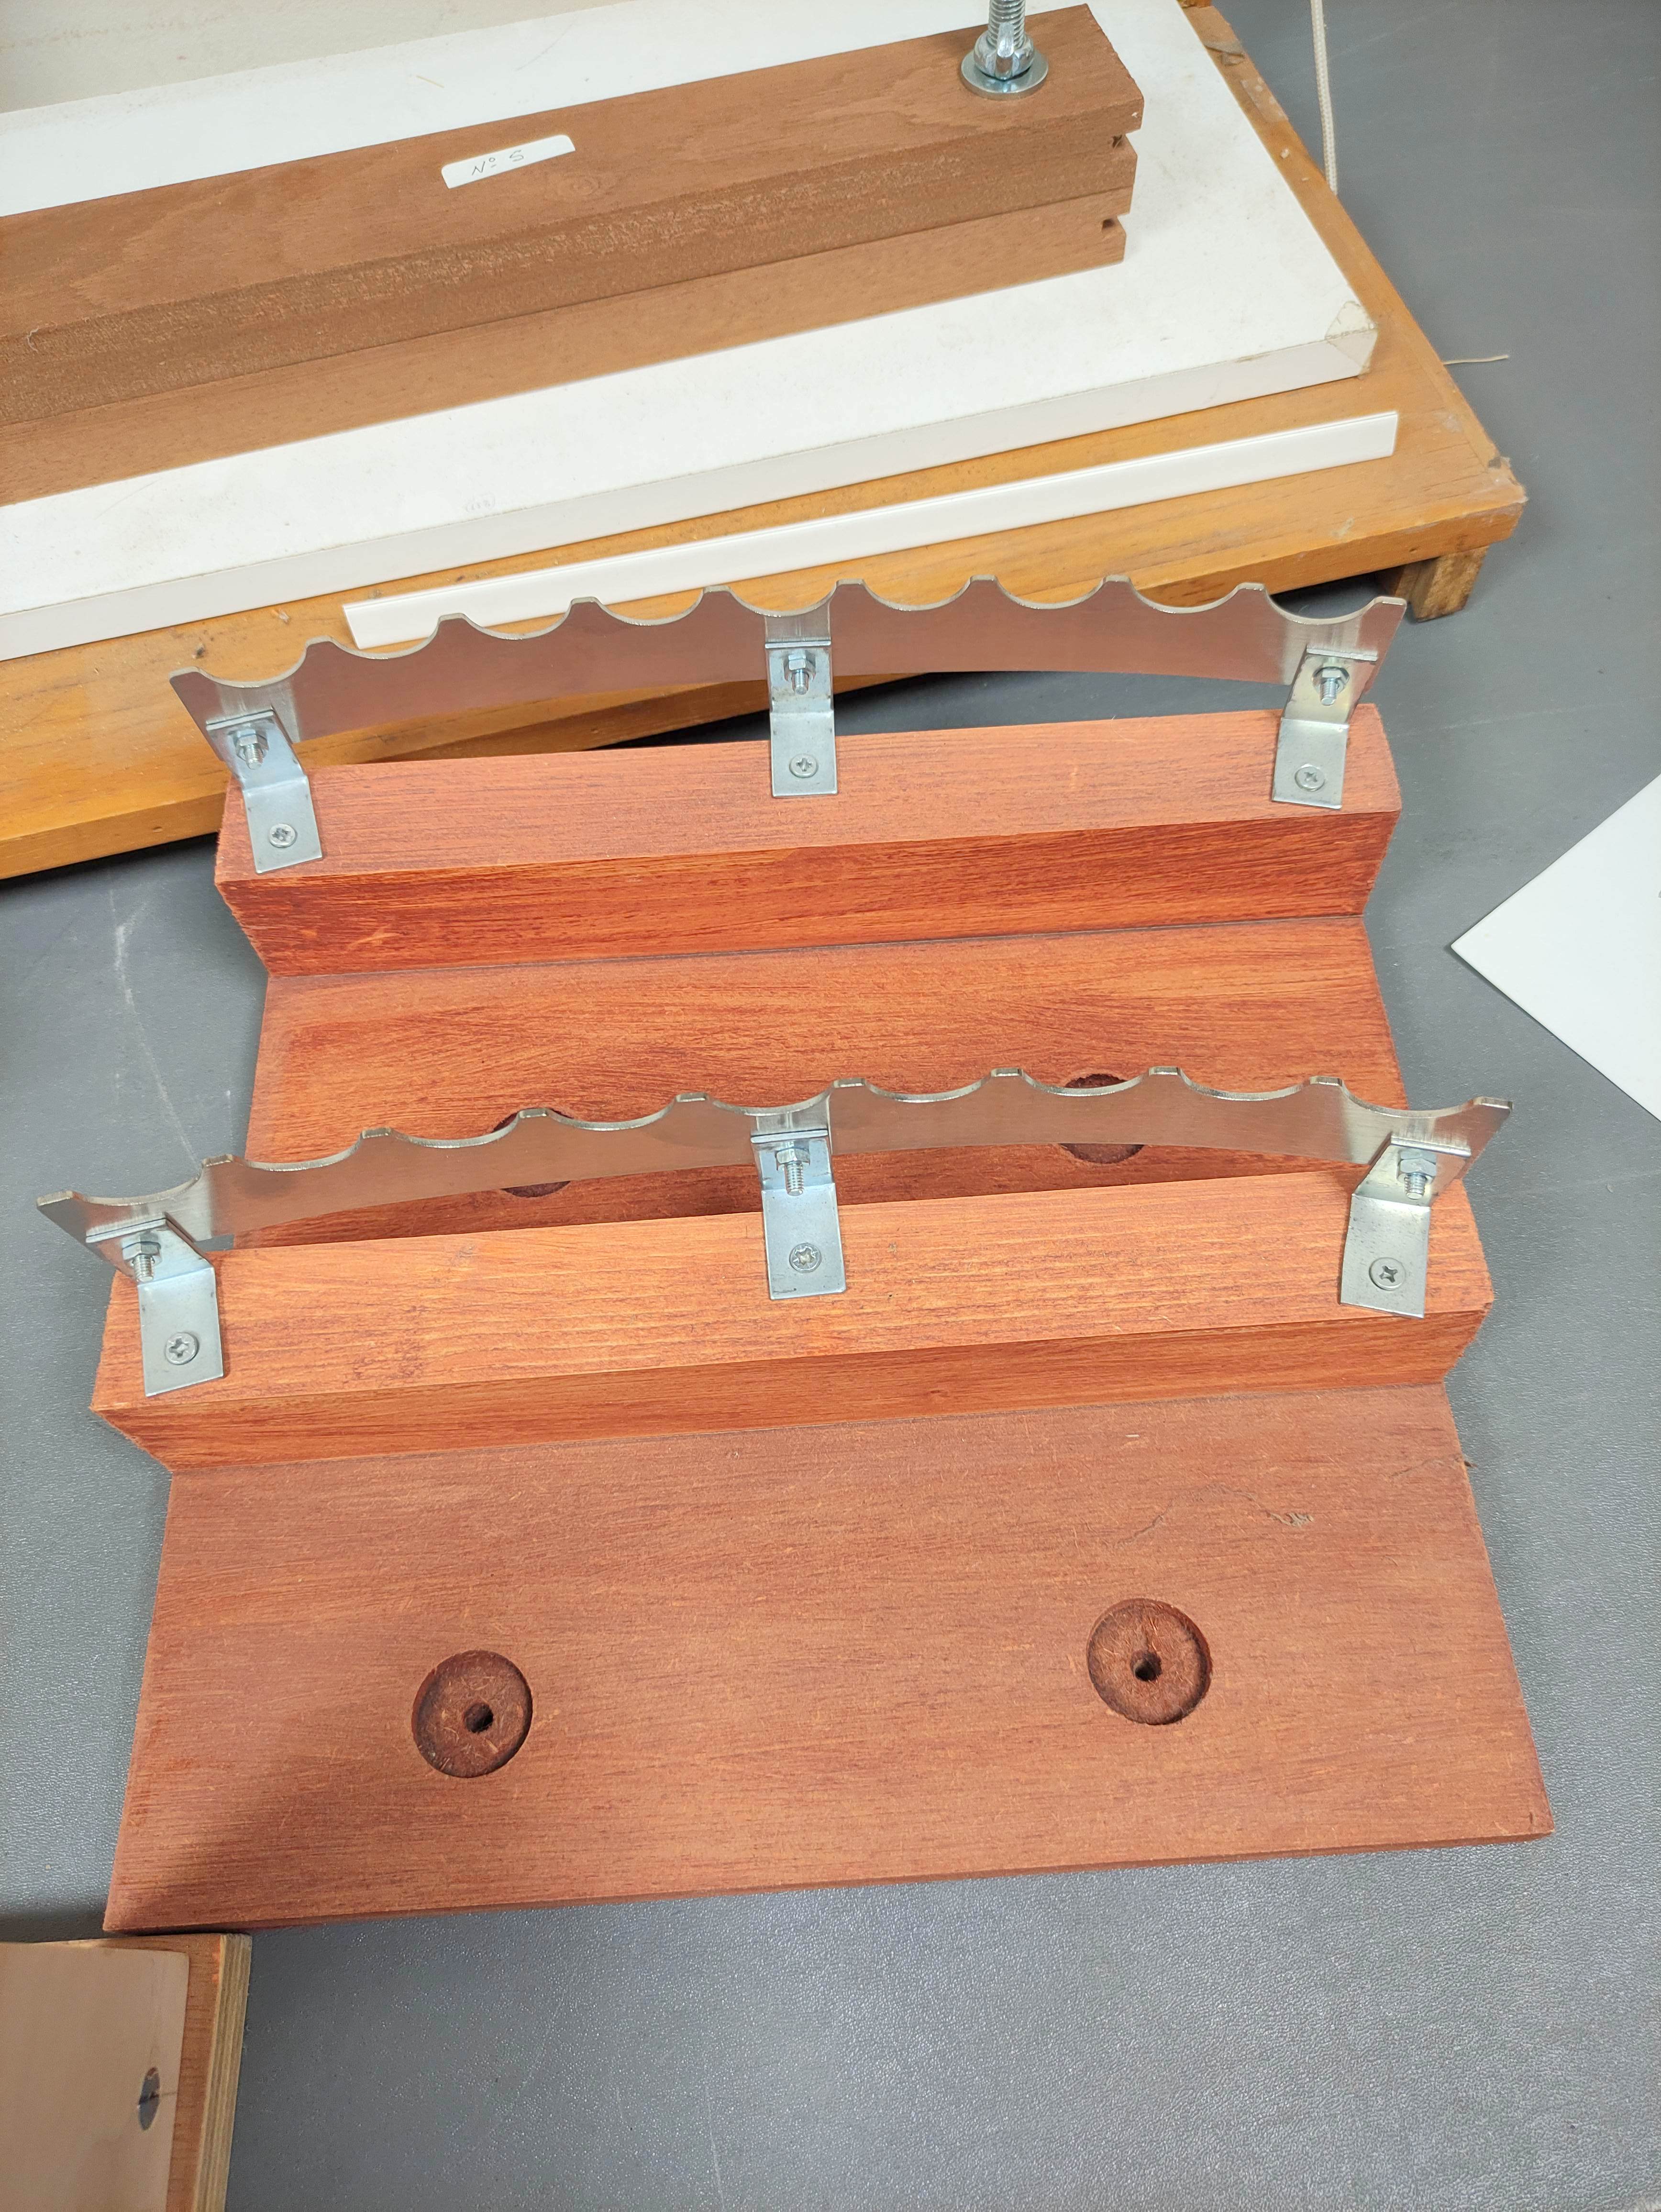 Bookbinding adjustable sewing frame and various rests. - Image 4 of 4